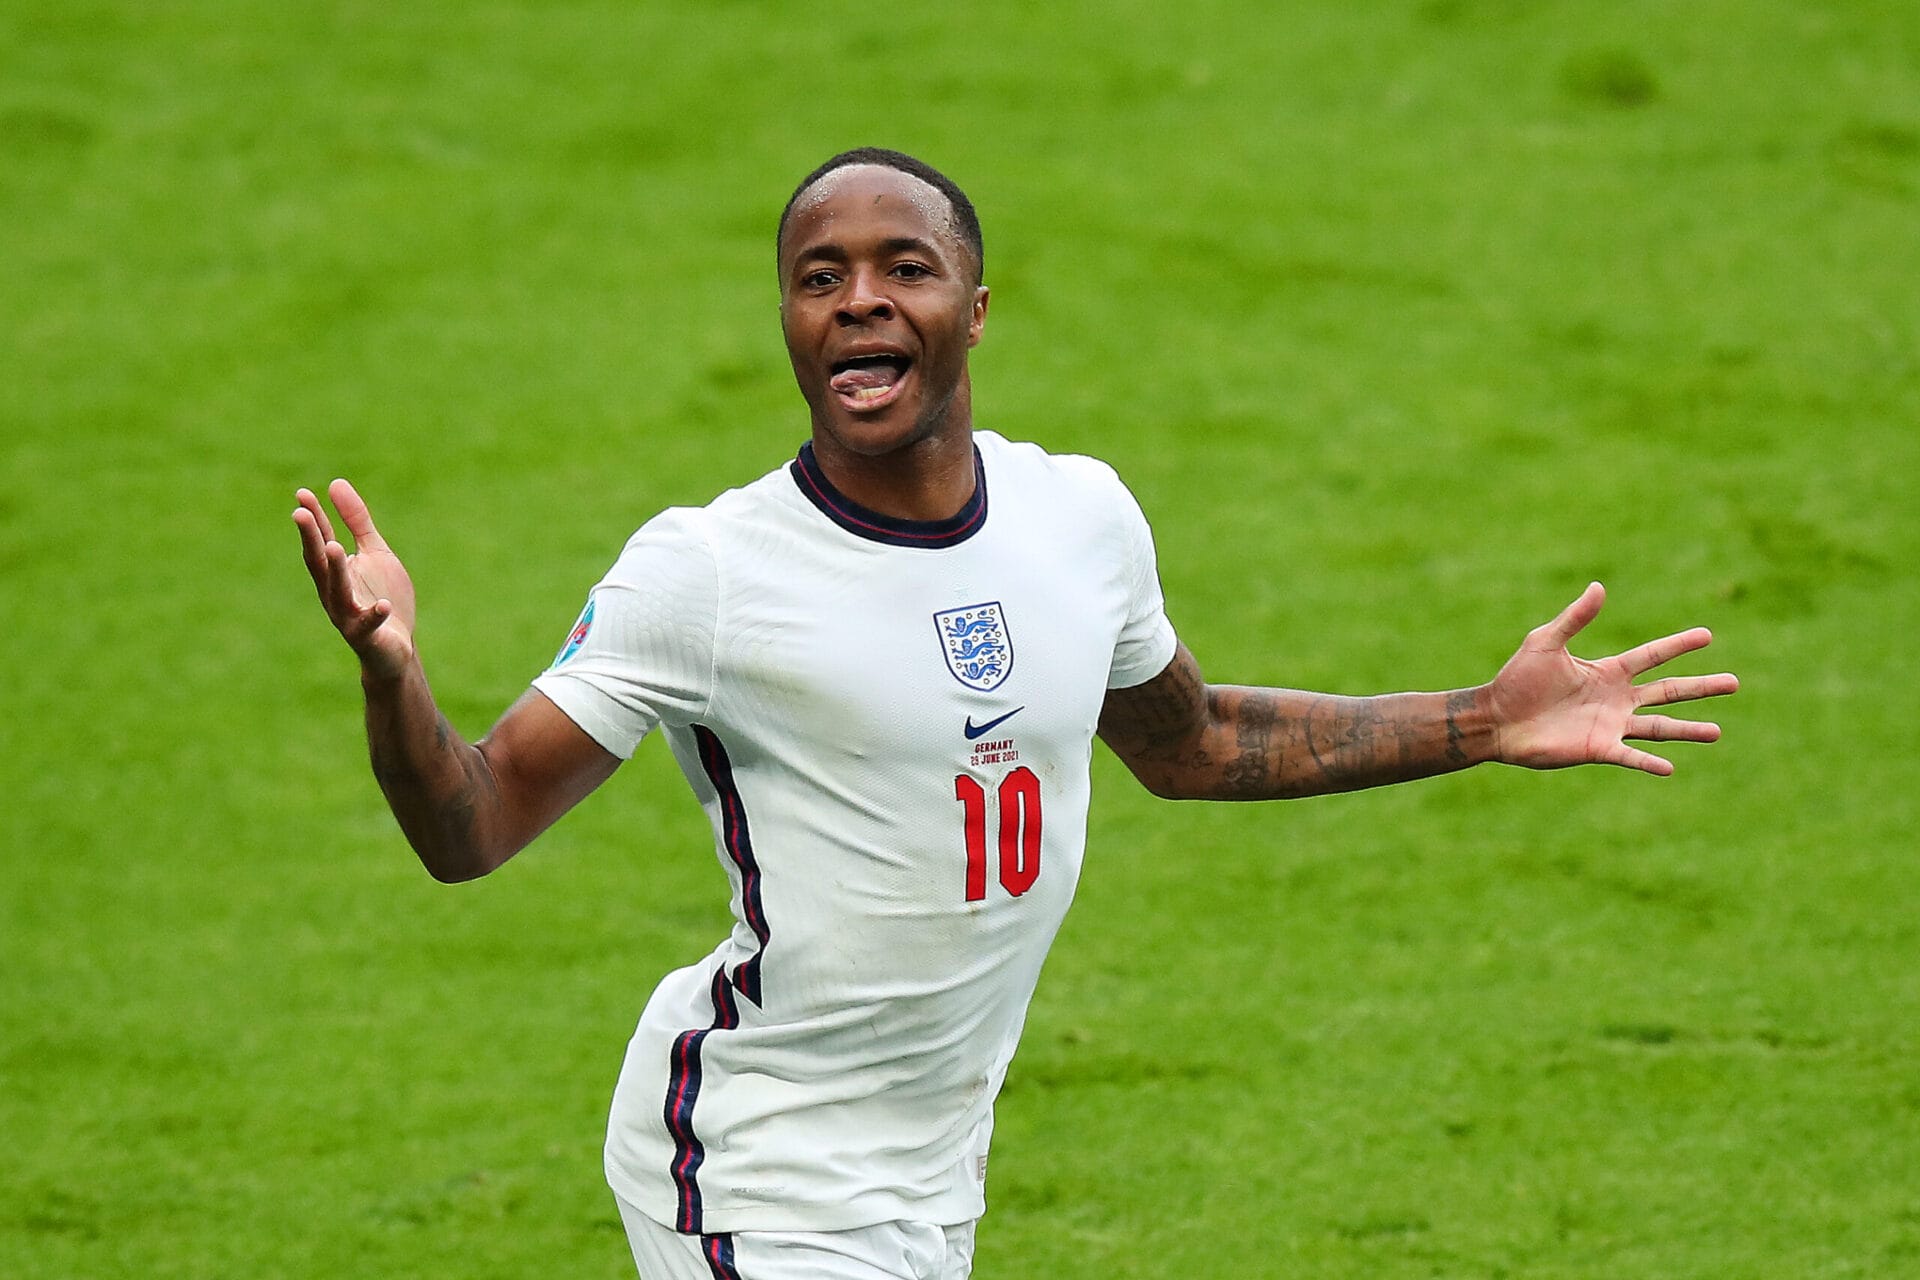 LONDON, ENGLAND - JUNE 29: Raheem Sterling of England celebrates after scoring a goal to make it 1-0 during the UEFA Euro 2020 Championship Round of 16 match between England and Germany at Wembley Stadium on June 29, 2021 in London, United Kingdom.